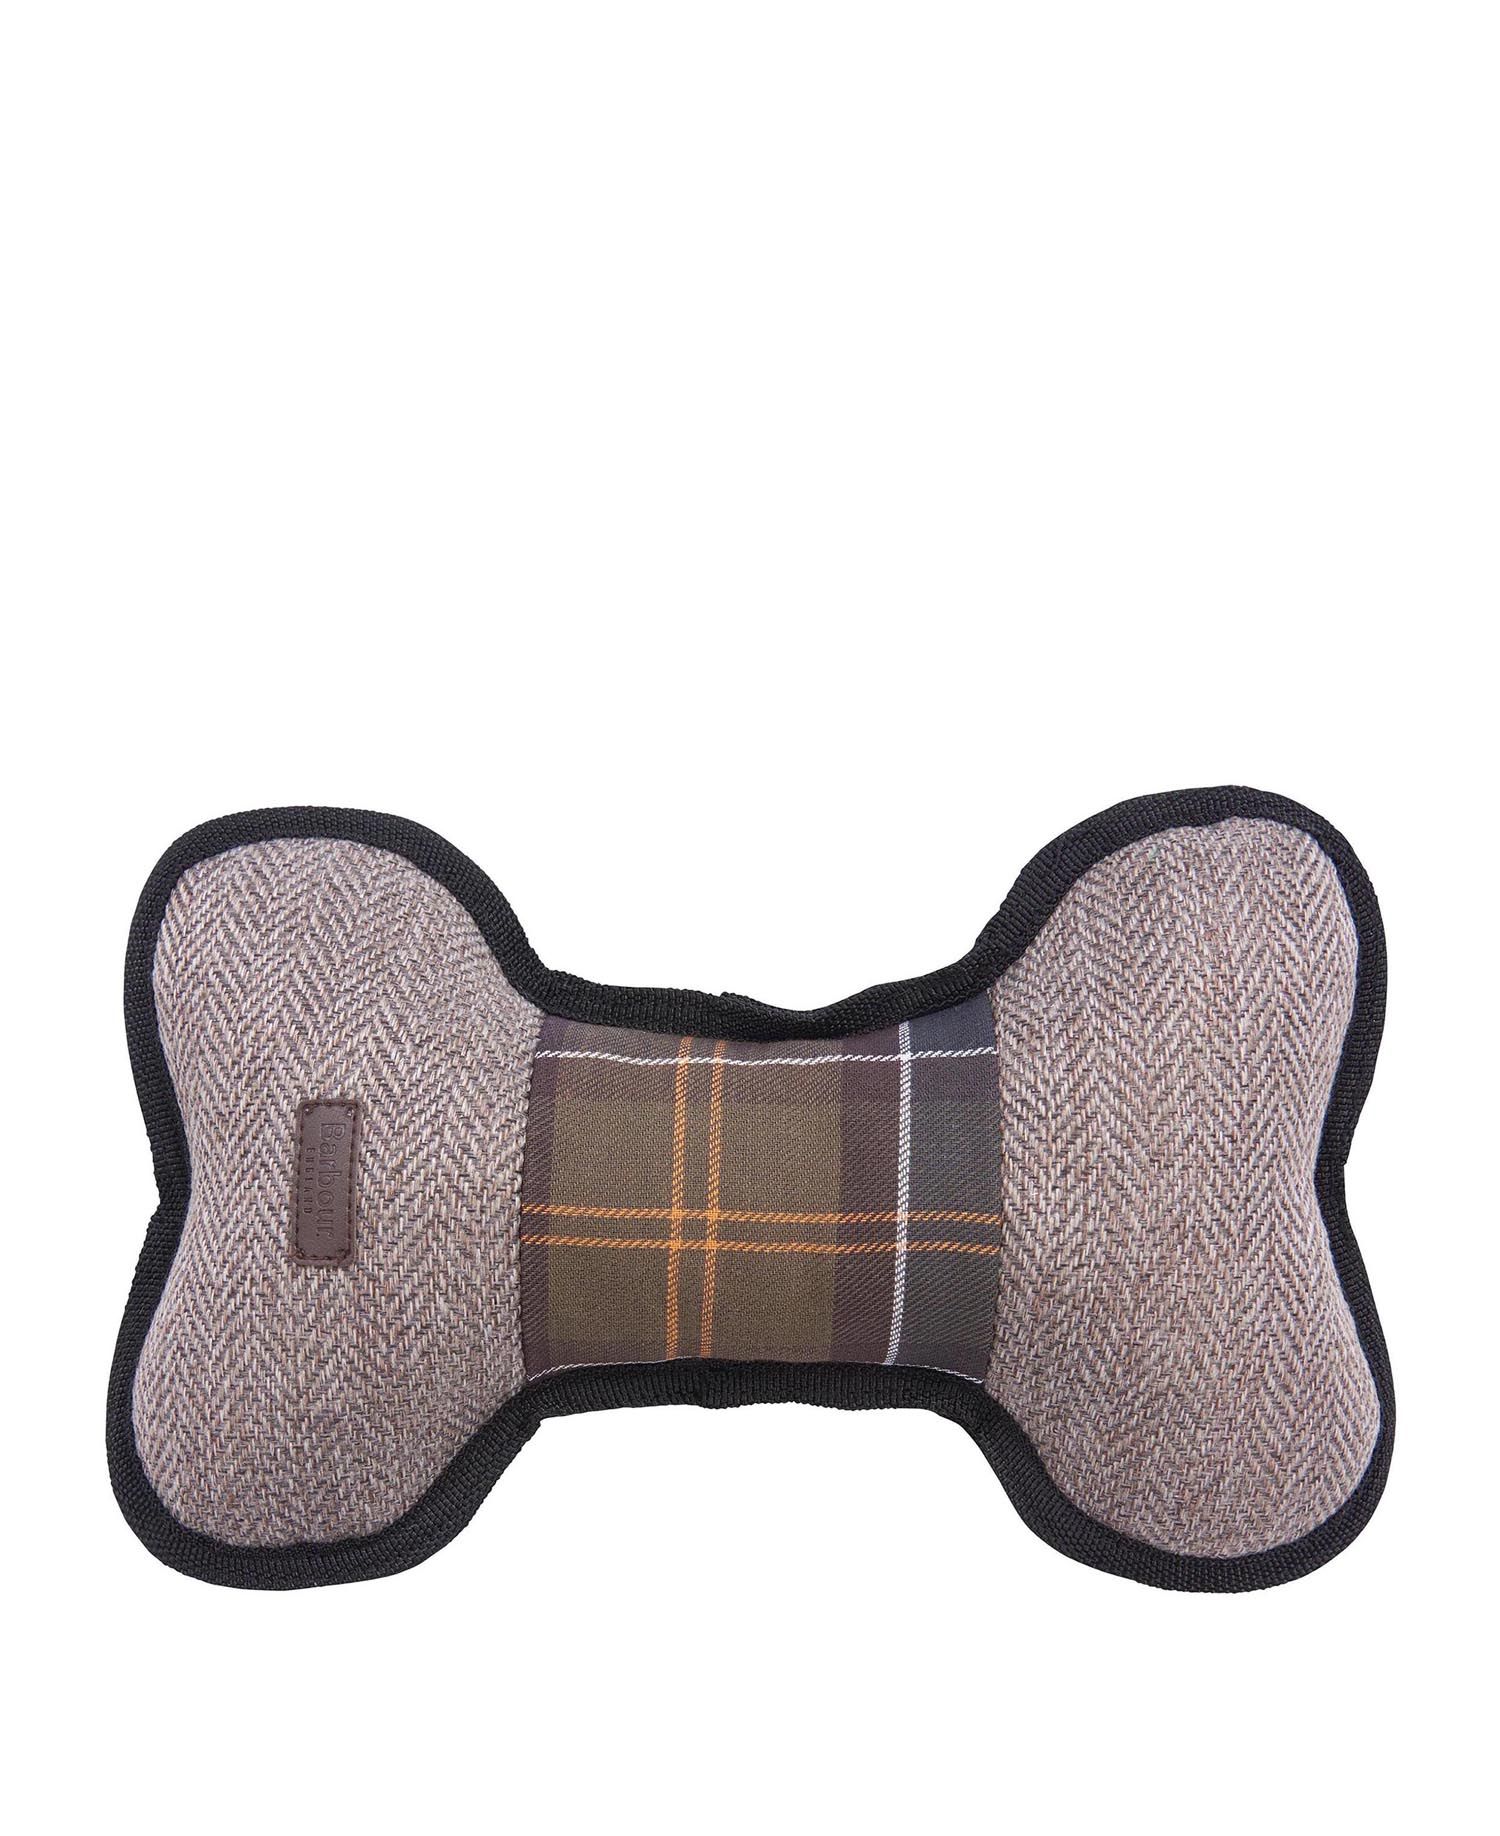 Barbour Dog Toy